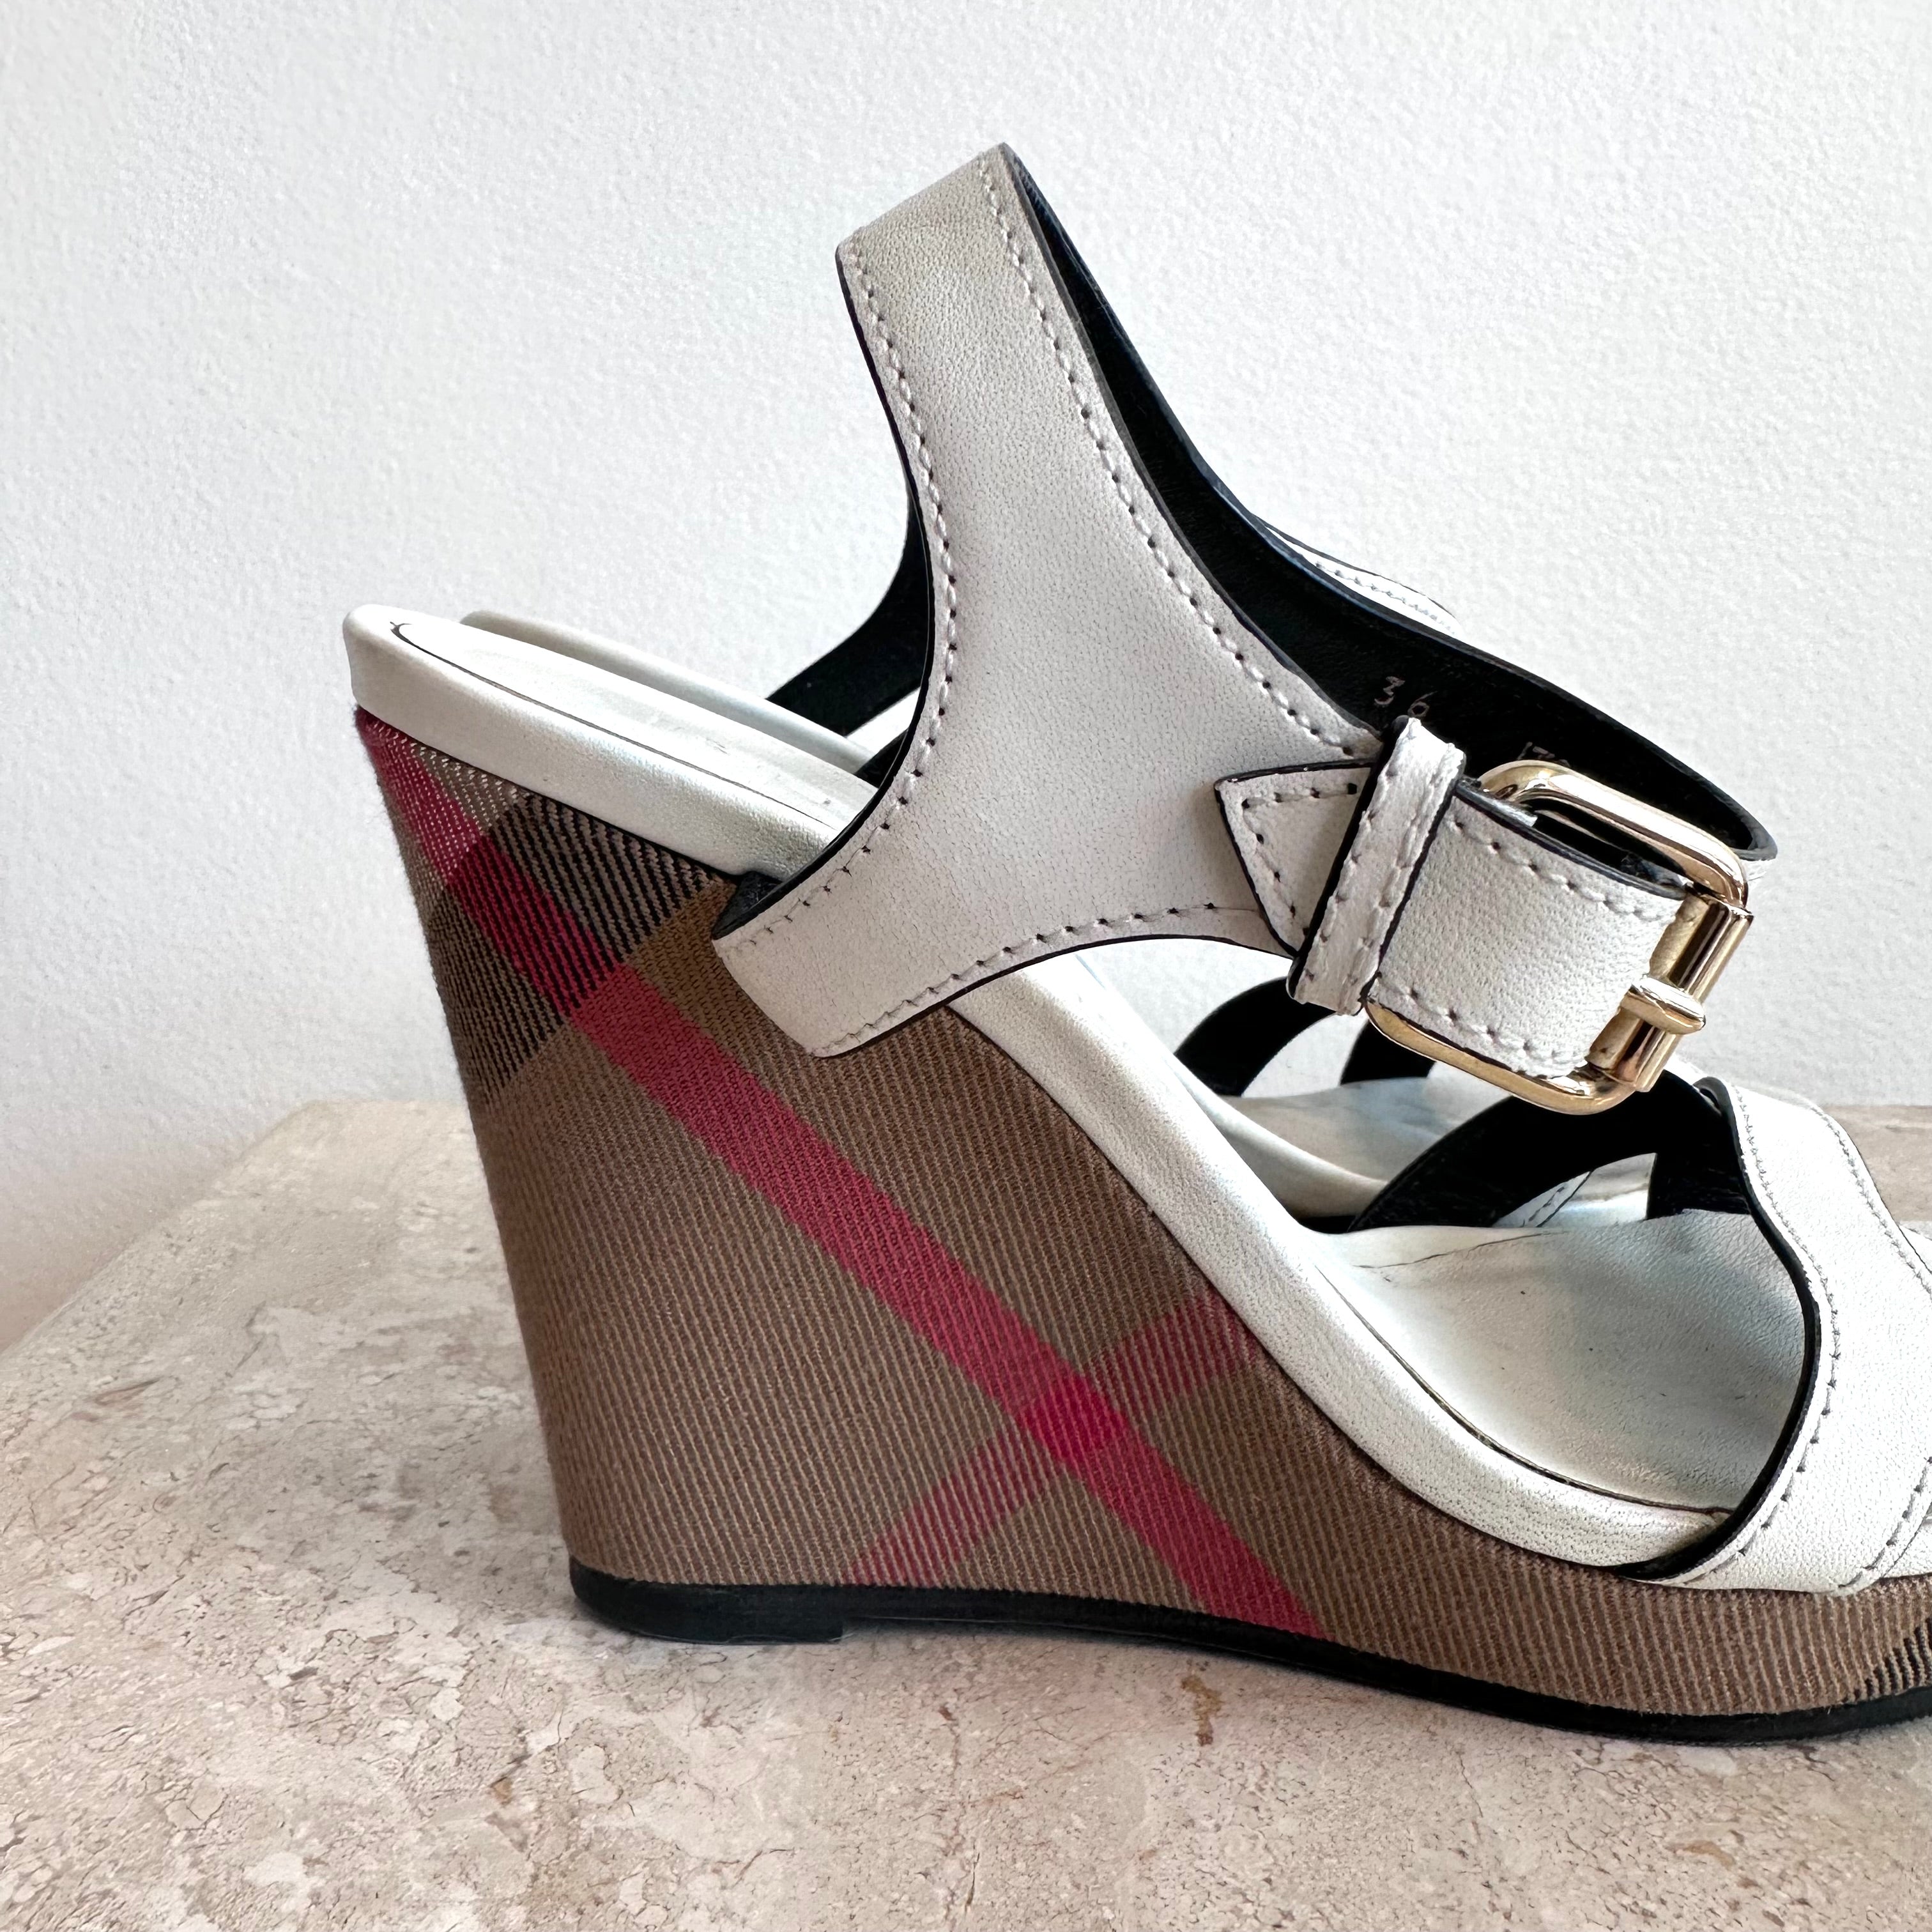 Pre-Owned BURBERRY Wedge Heel Size 36